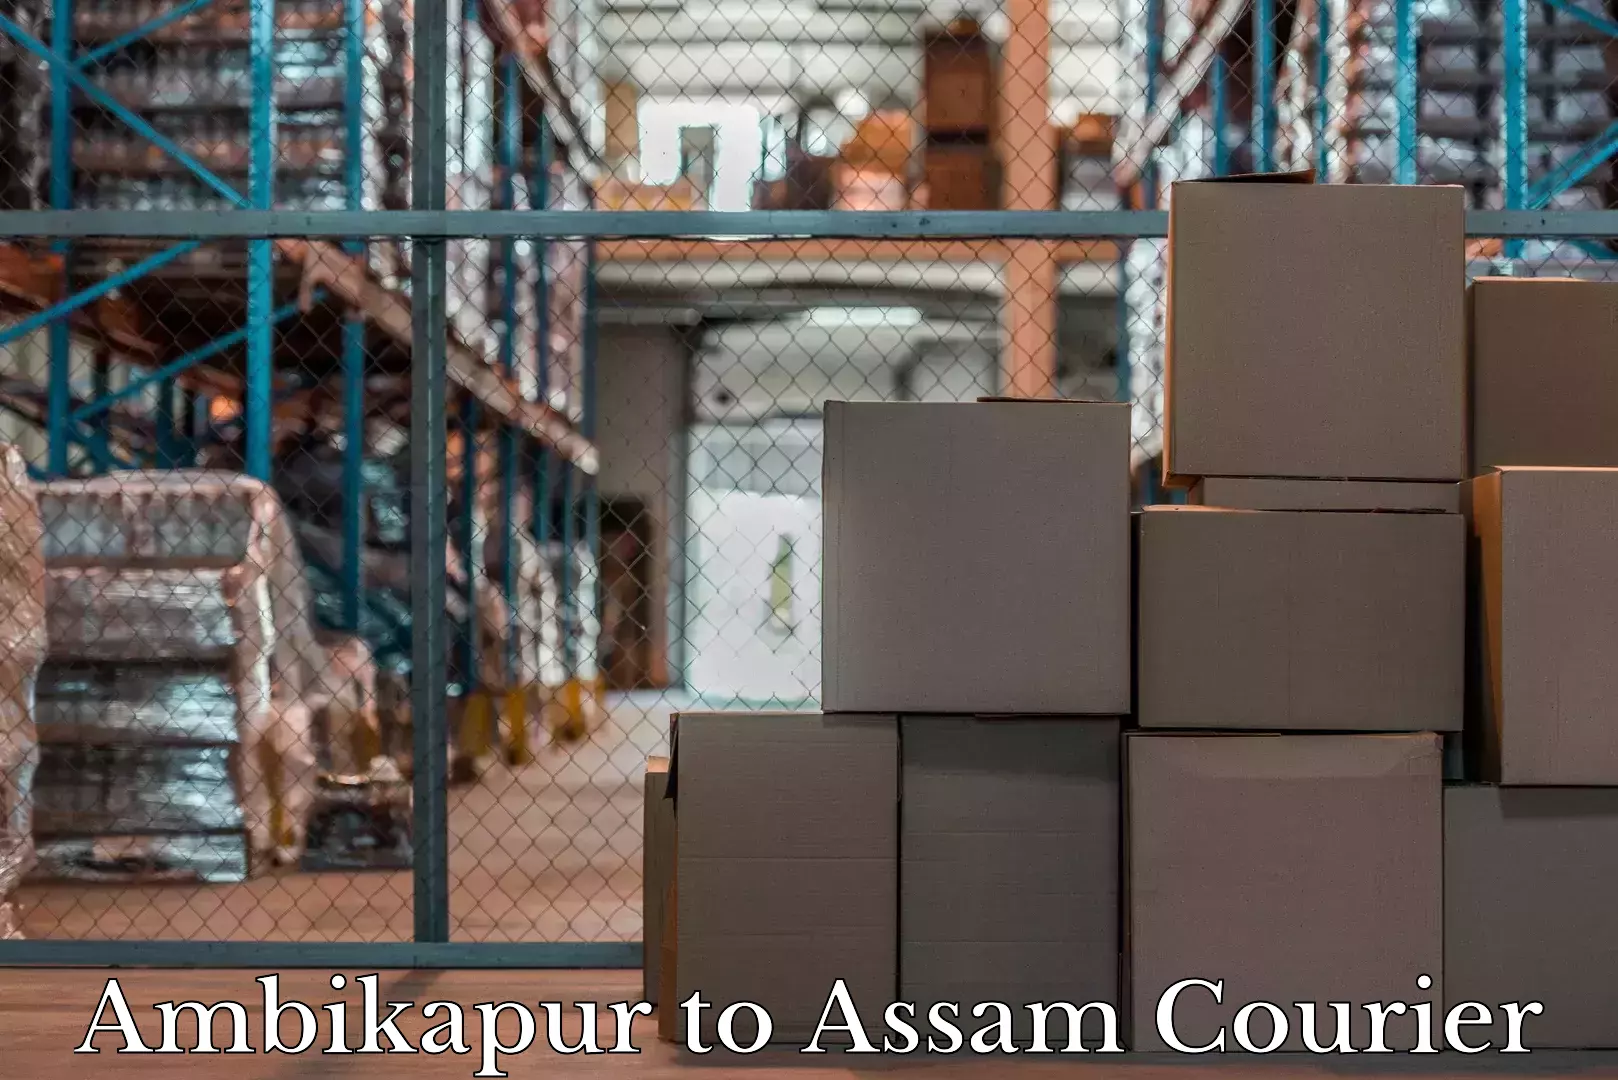 Baggage transport quote Ambikapur to Lala Assam